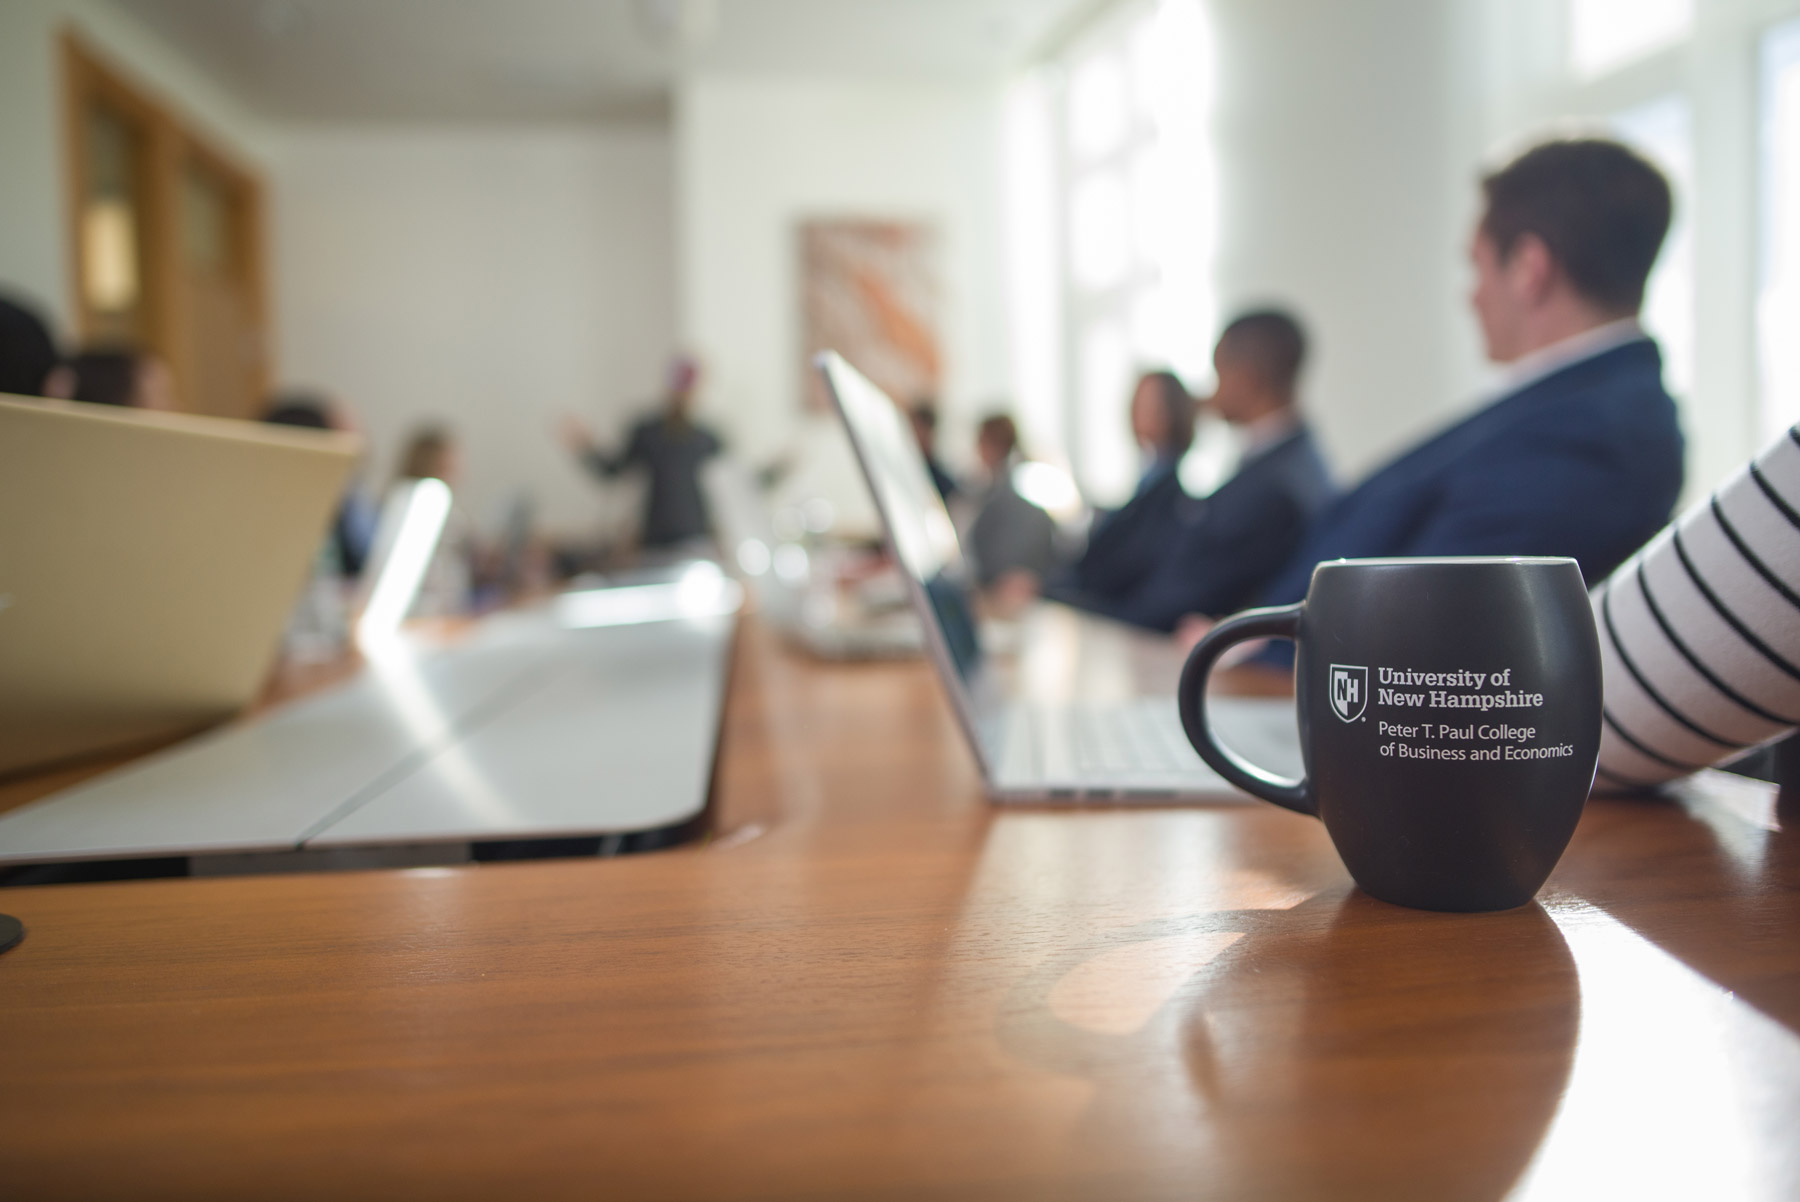 A coffee mug with the Peter T. Paul College of Business and Economics logo designed on the front in a business meeting room